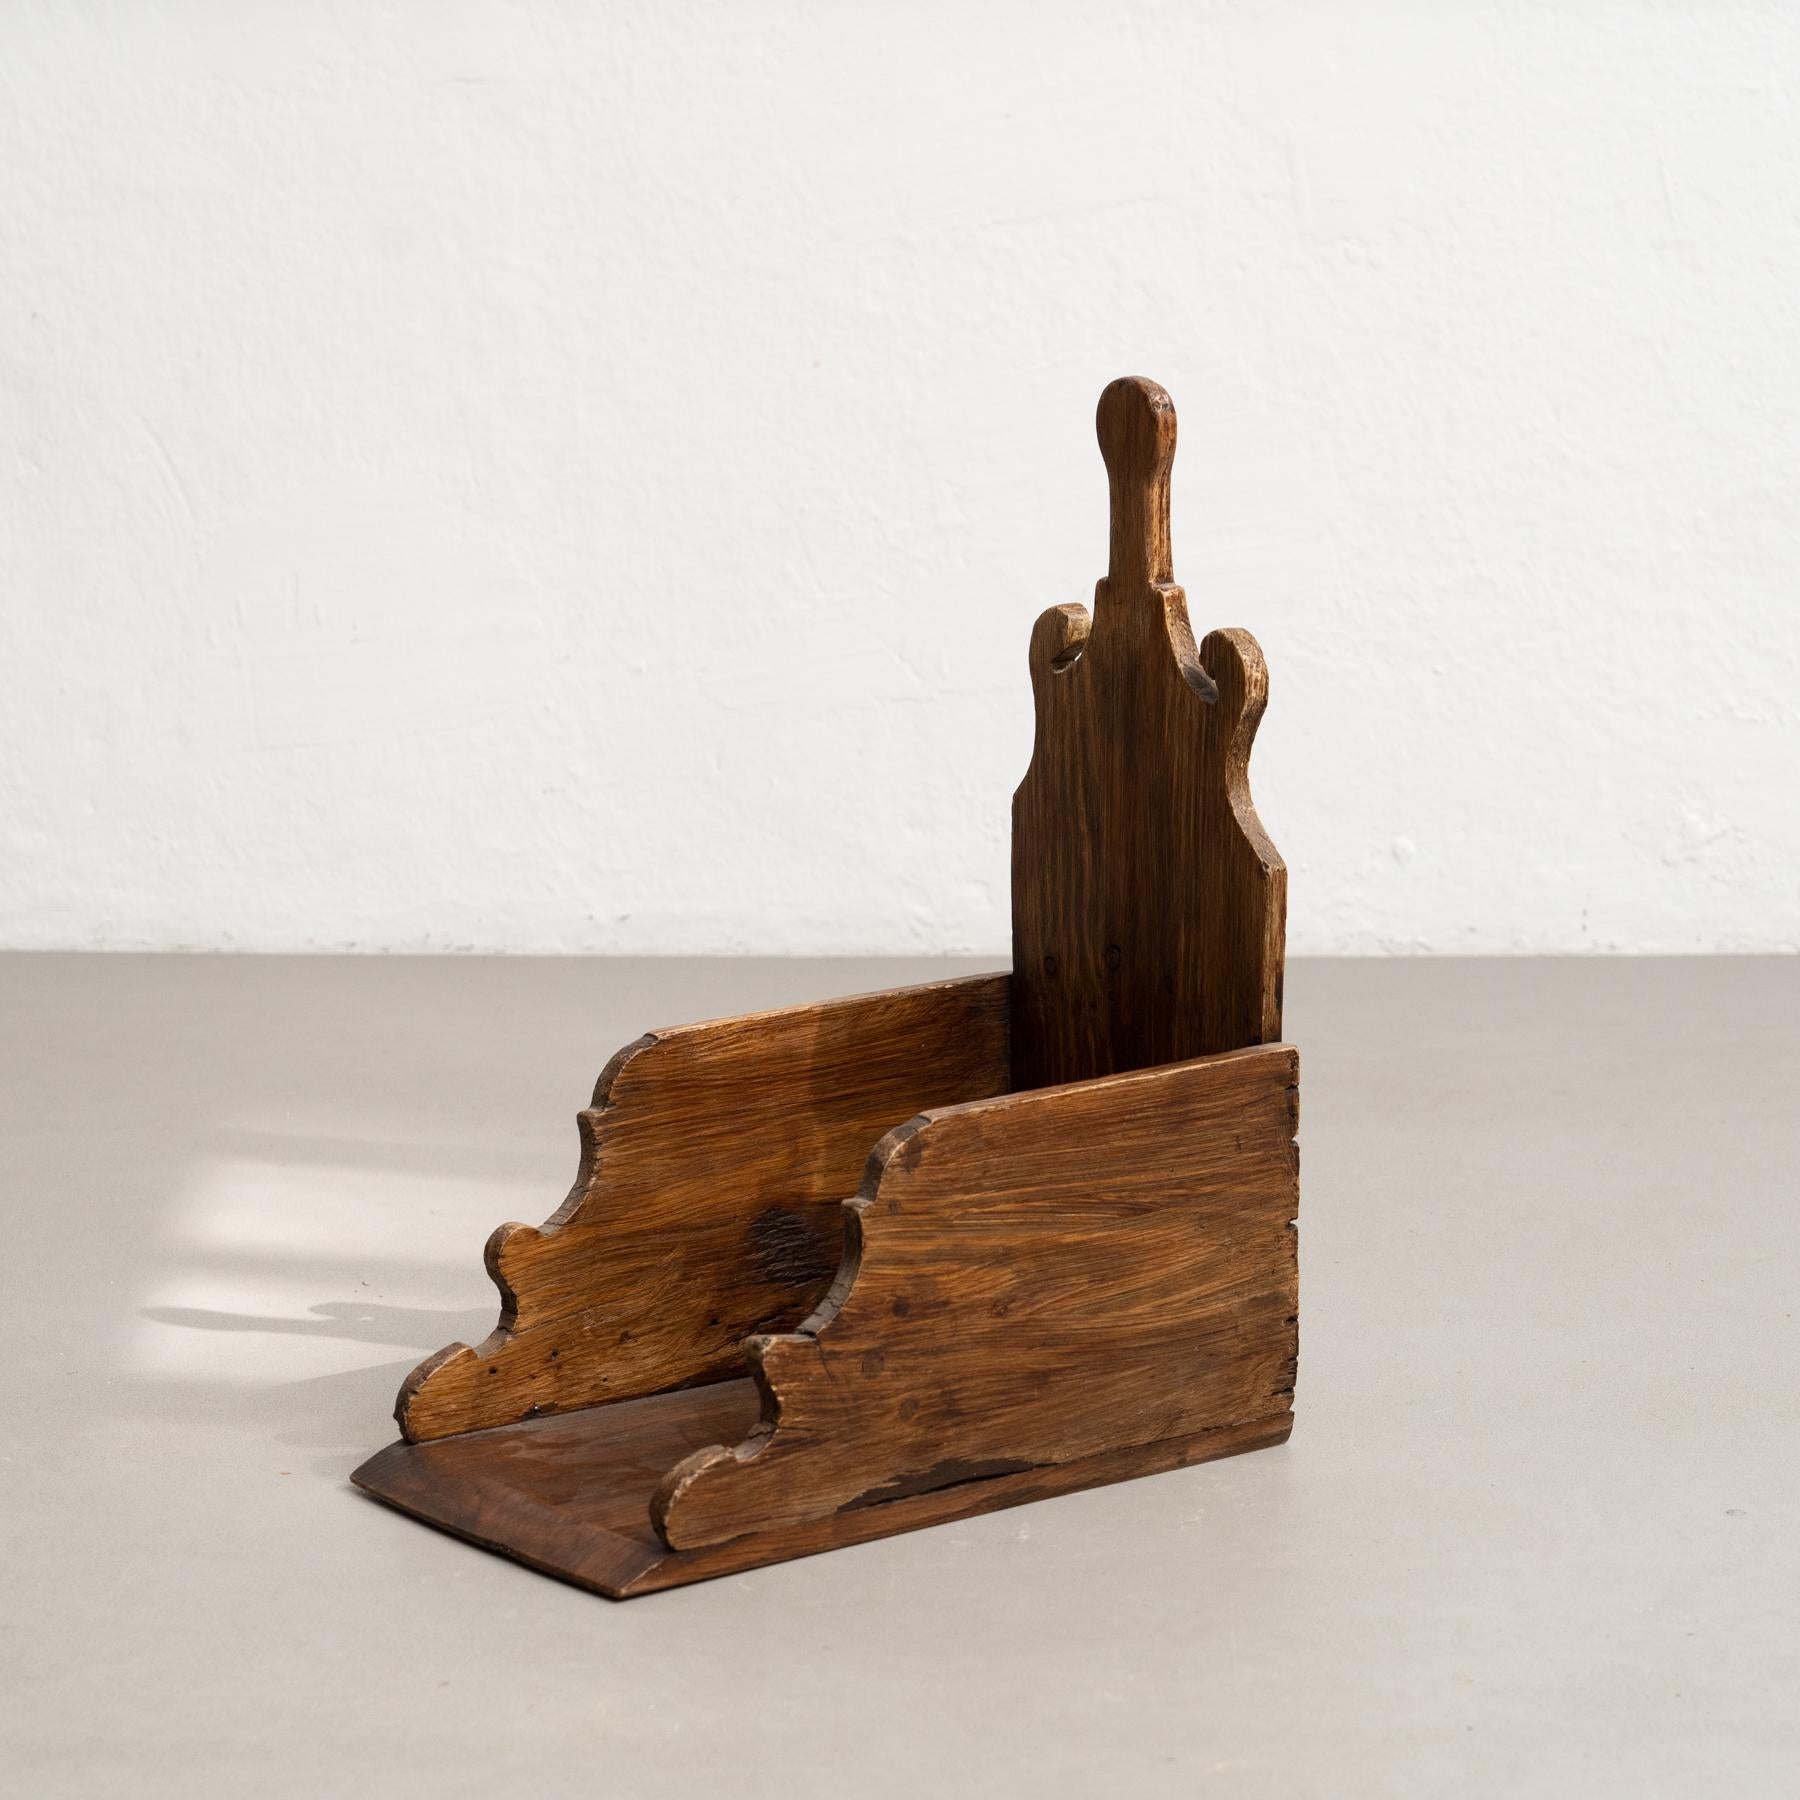 Early 20th Century Rustic Sculptural Wood Broom Dustpan In Good Condition For Sale In Barcelona, ES